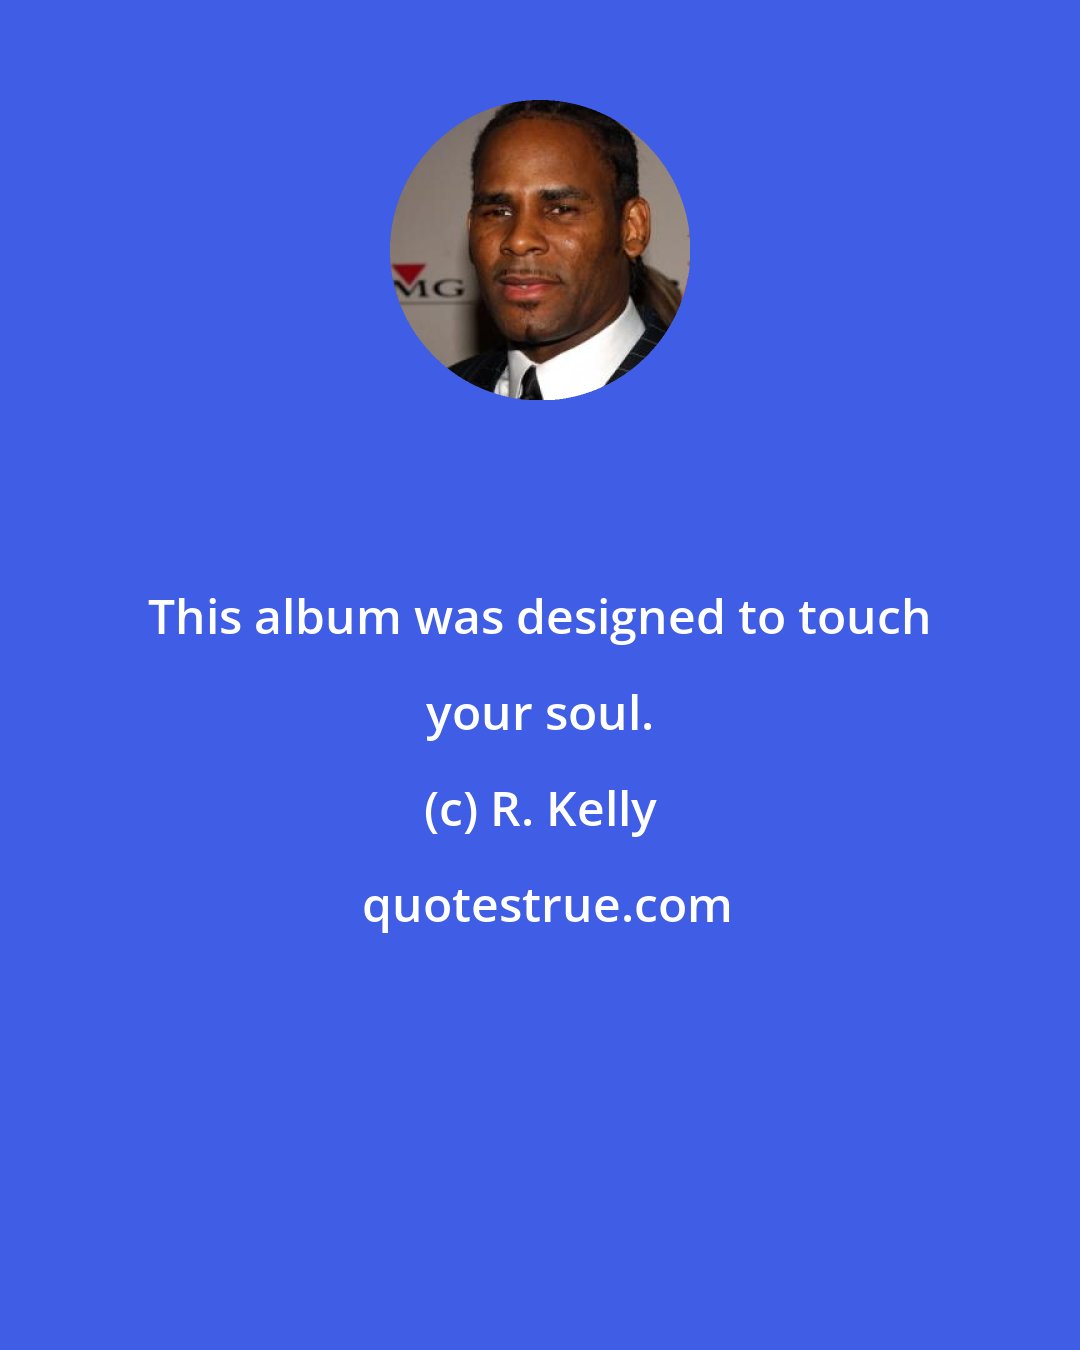 R. Kelly: This album was designed to touch your soul.